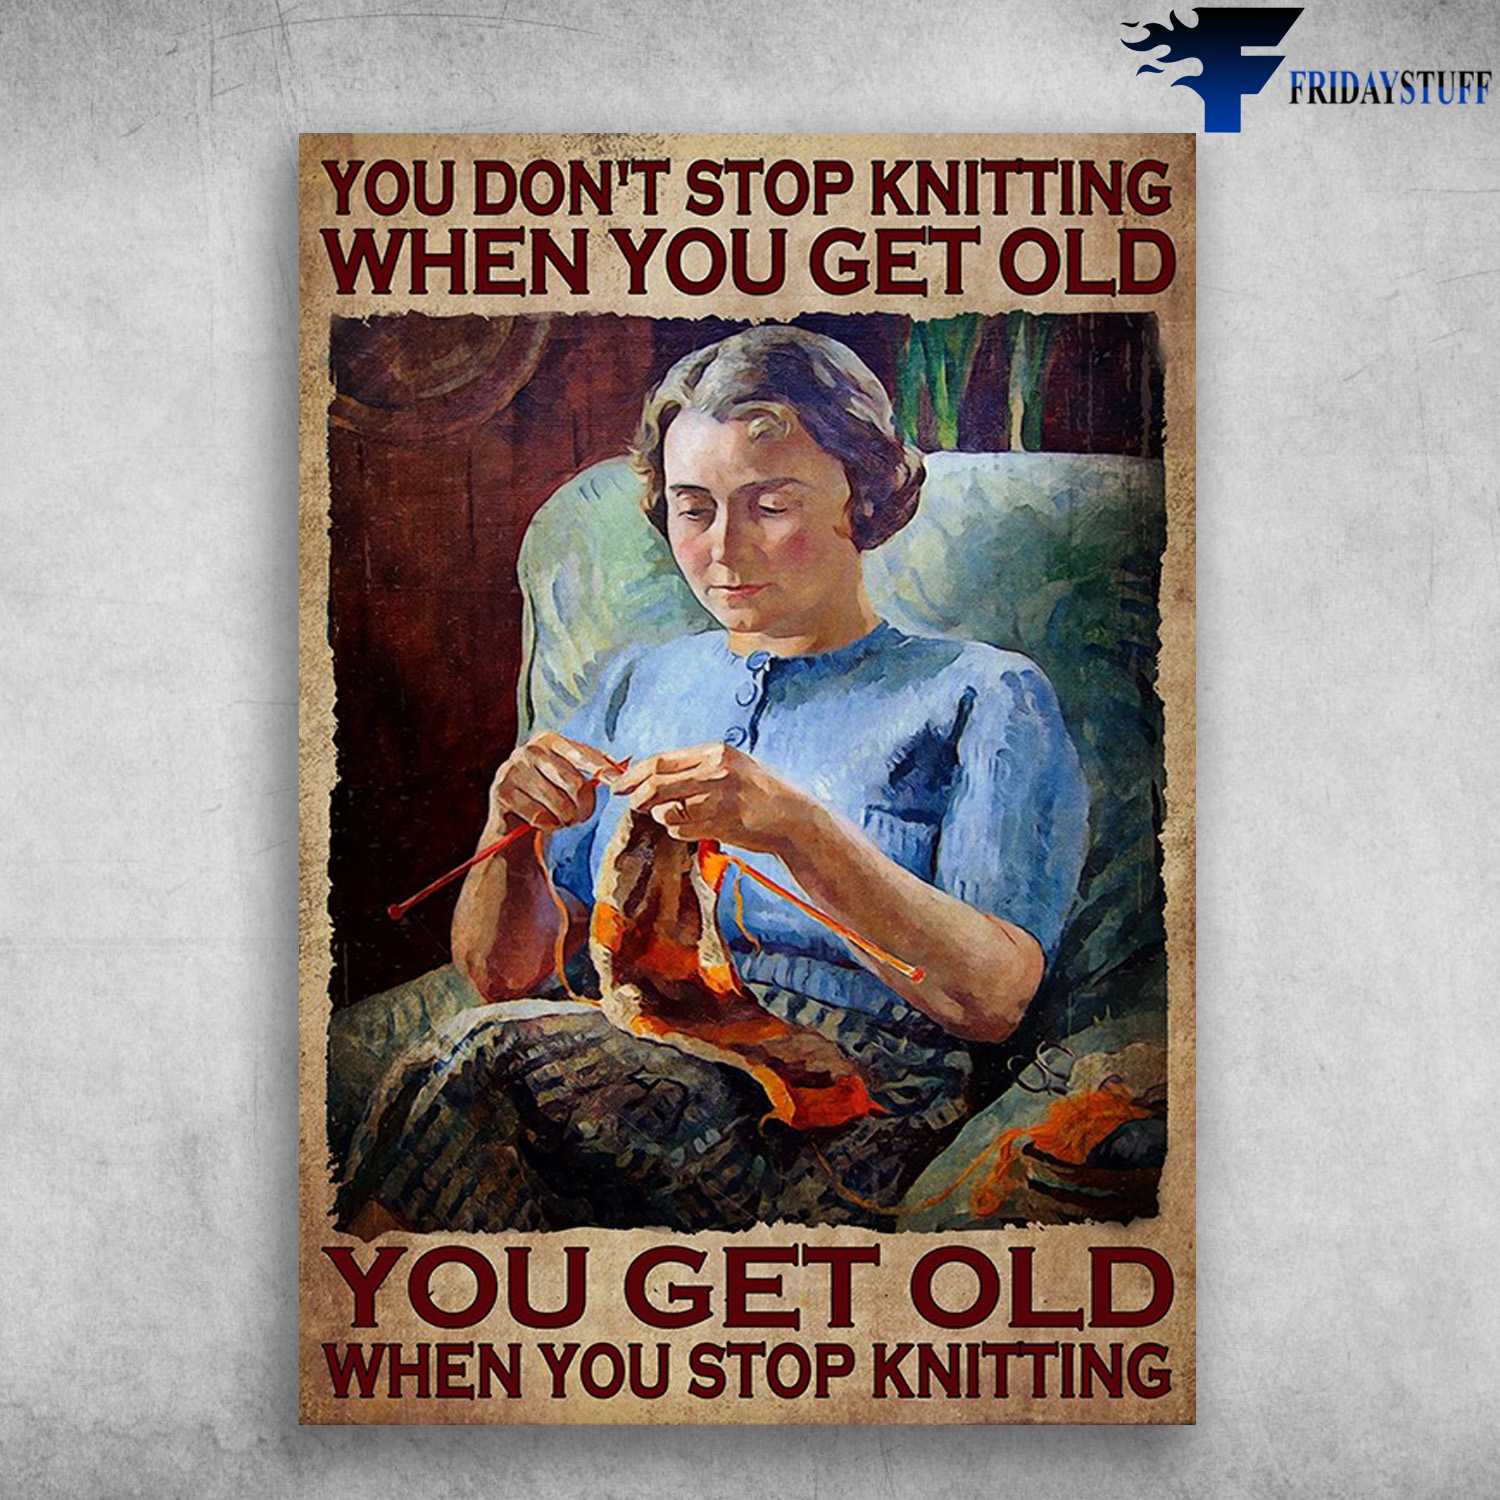 Old Lady Loves Knitting - You Don't Stop Knitting When You Get Old, You Get Old When You Stop Knitting